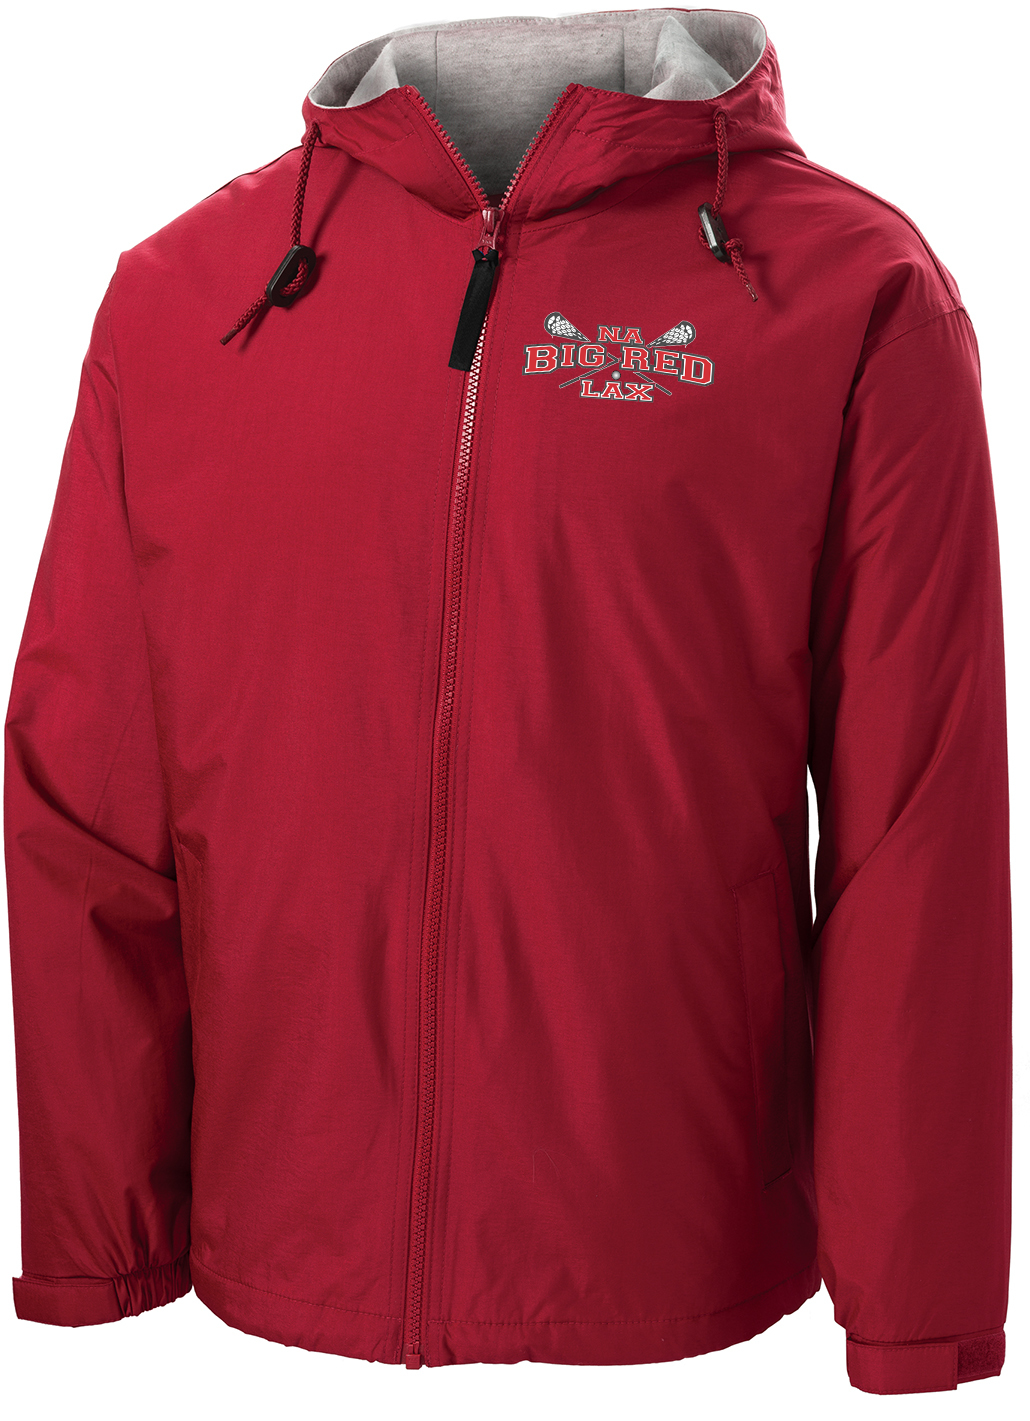 NA Big Red Lax Red Hooded Jacket